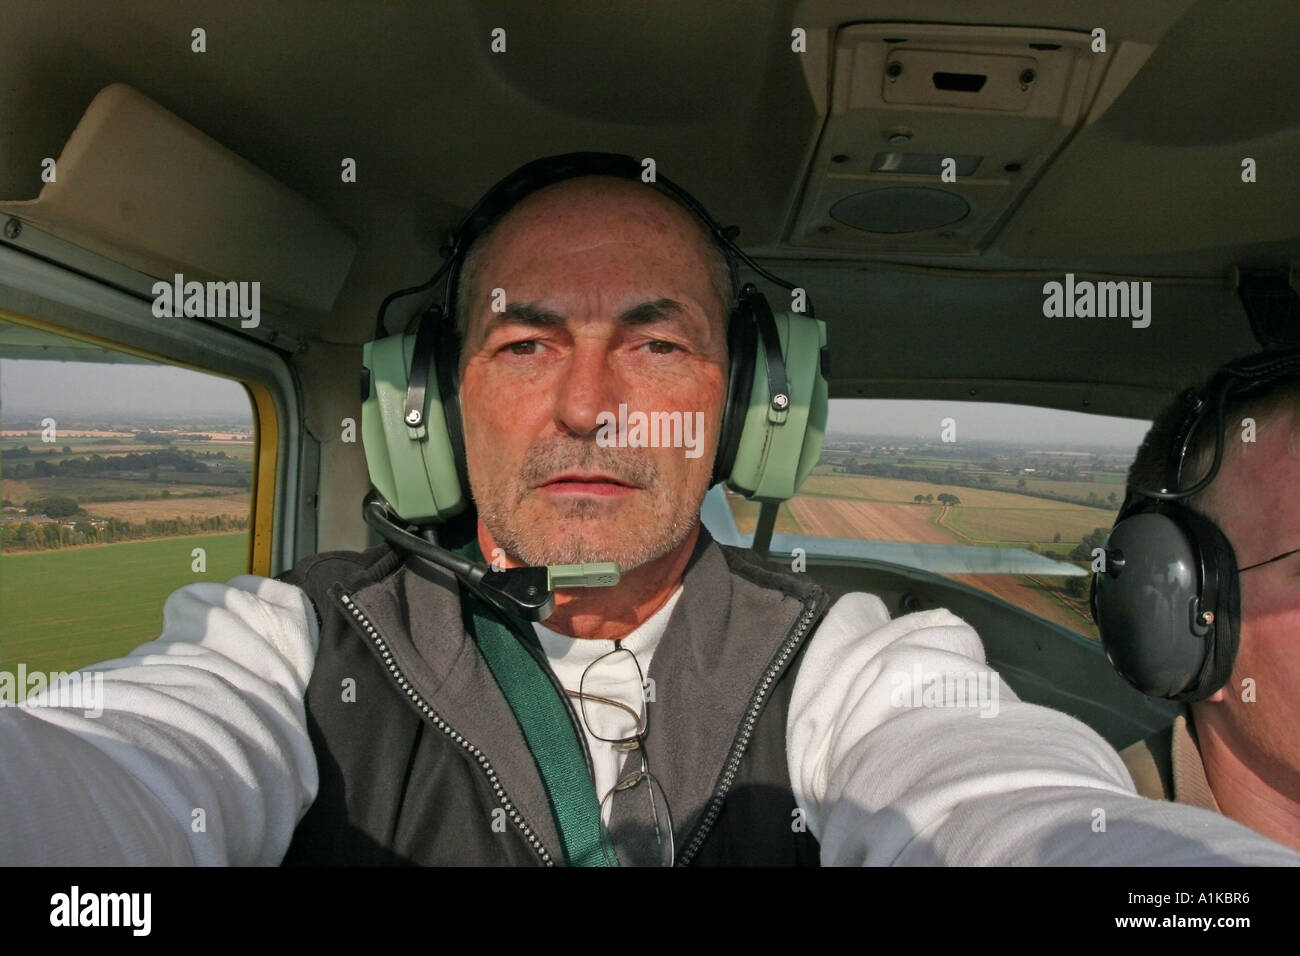 A middle aged pilot flying a small Cessna aircraft Stock Photo